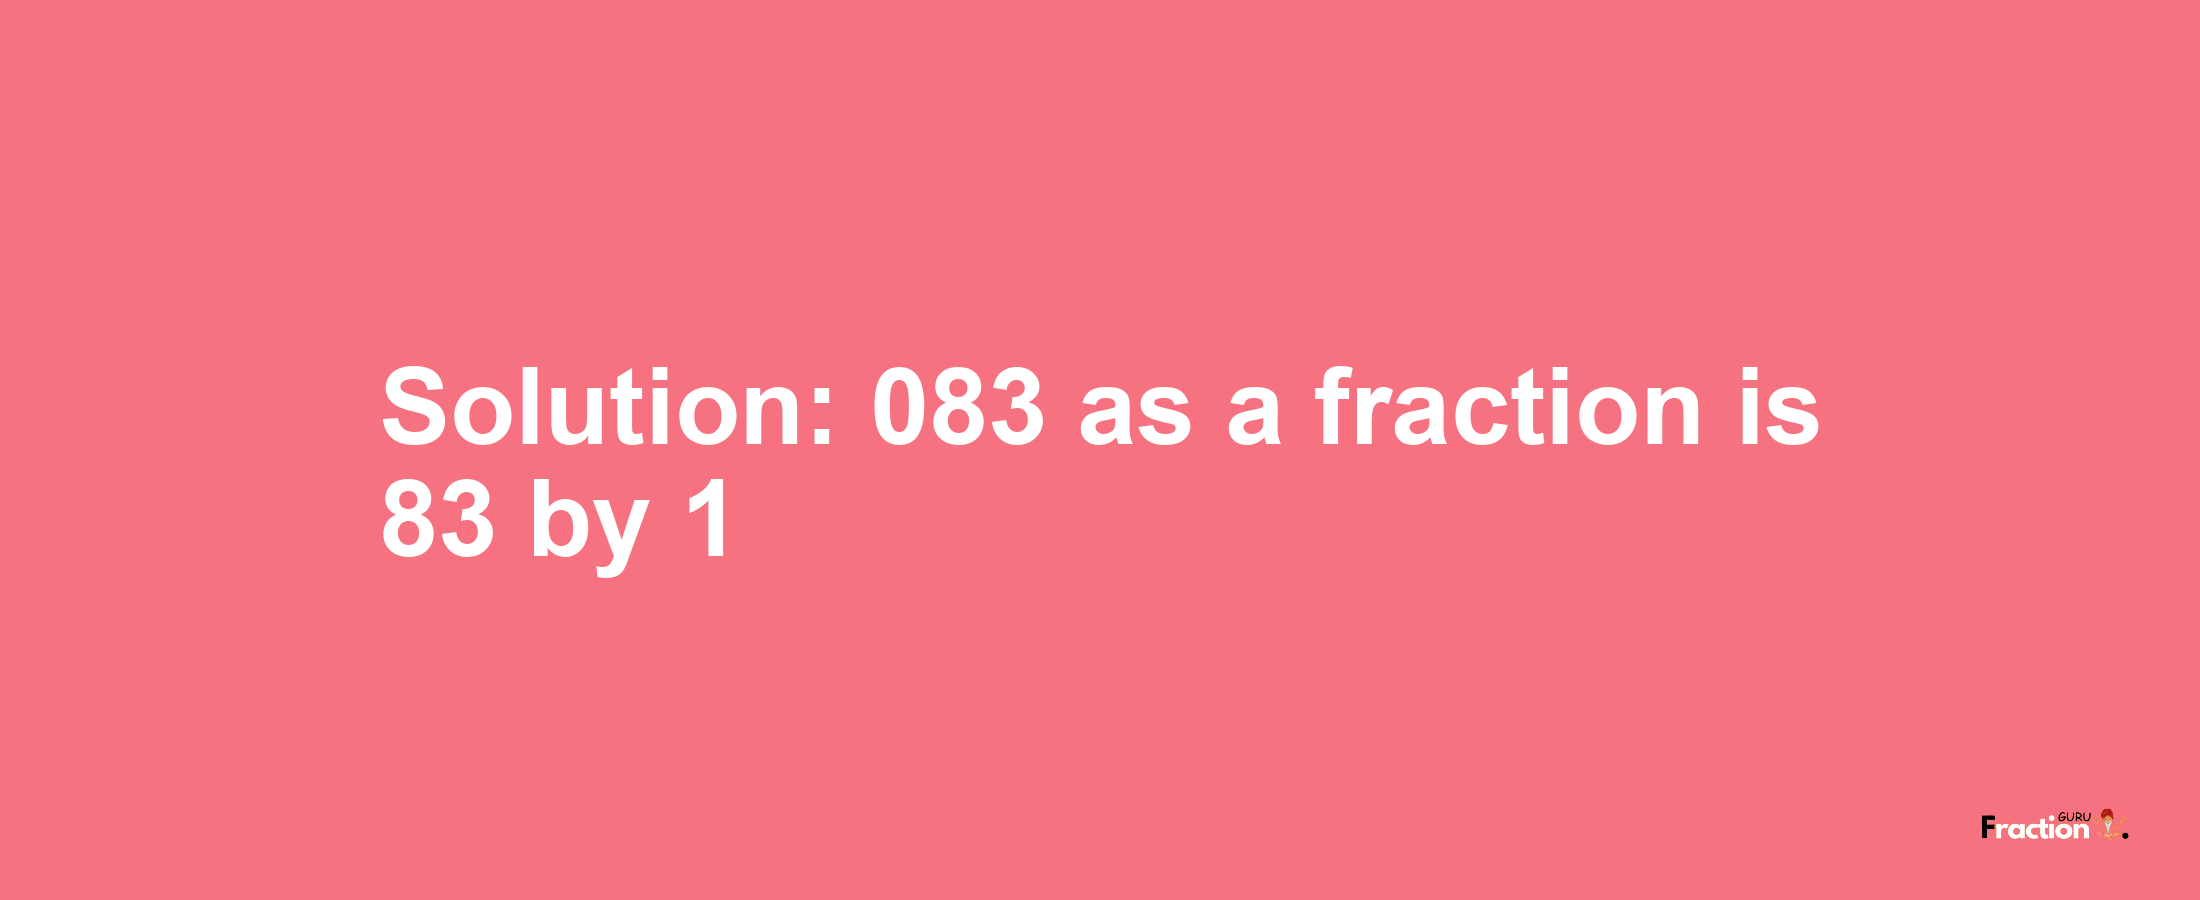 Solution:083 as a fraction is 83/1